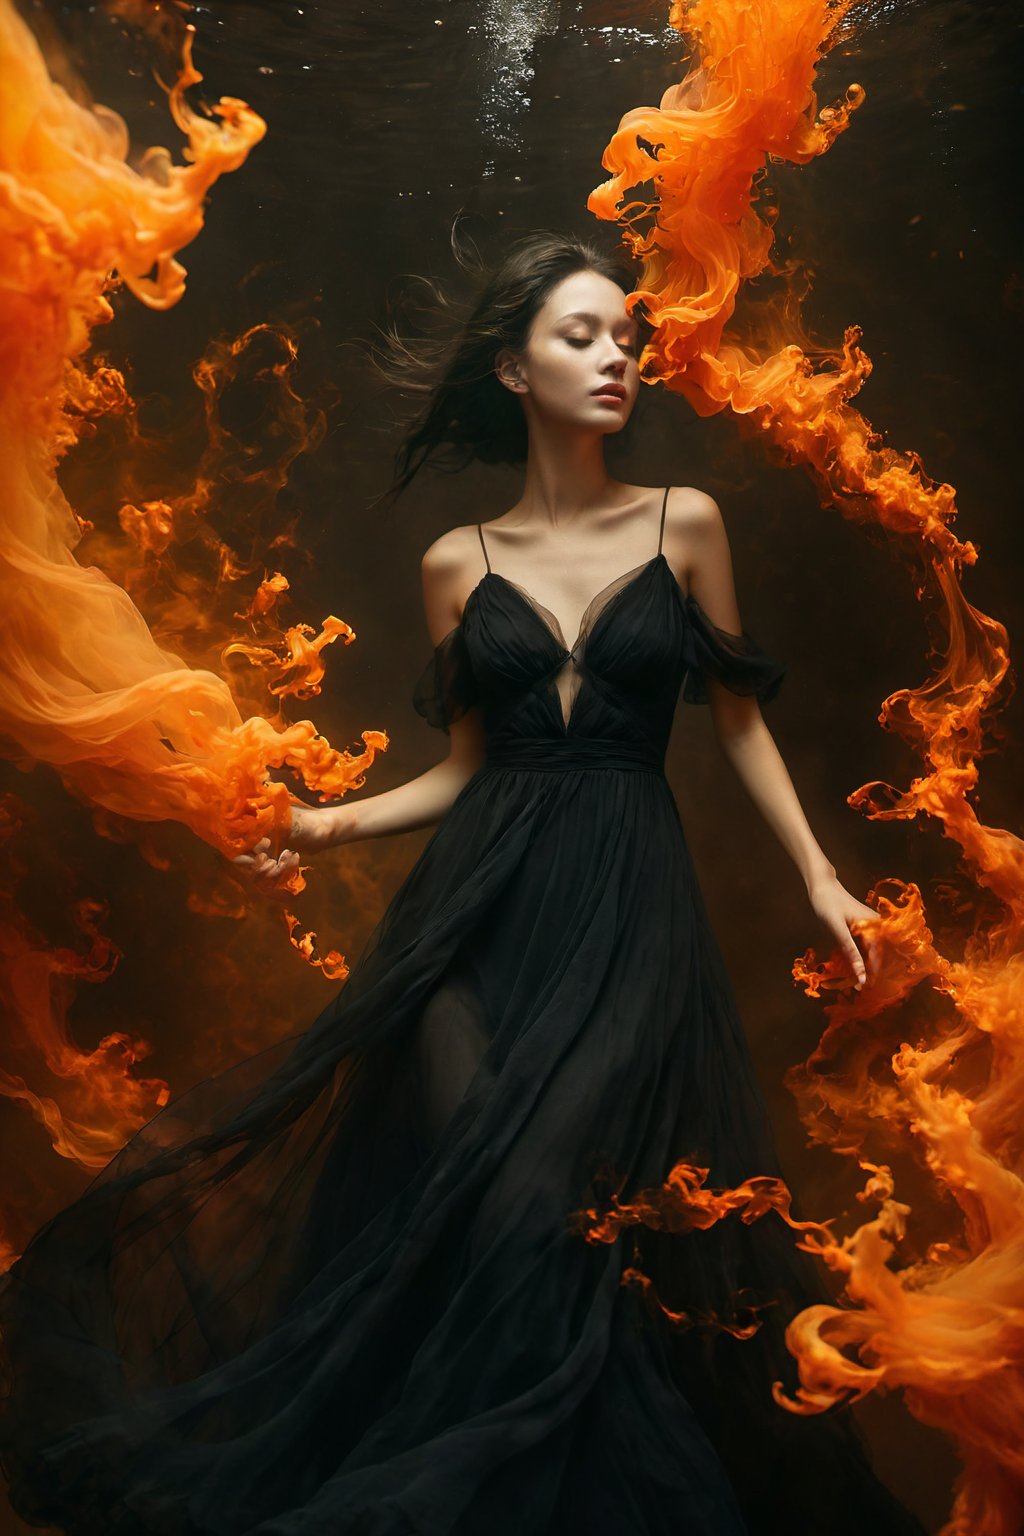 A portrait of a woman in a dark, flowing dress, surrounded by intense, dynamic orange light that resembles ink or smoke in water. The lighting should be dramatic, highlighting the contrast between the orange light and the dark shades of the dress, creating a vivid, ethereal atmosphere. The light should emanate from around the woman, giving the impression that she is emerging from a nebulous glow. The overall tone is moody and mystical, Precipitate girl, sexy pose